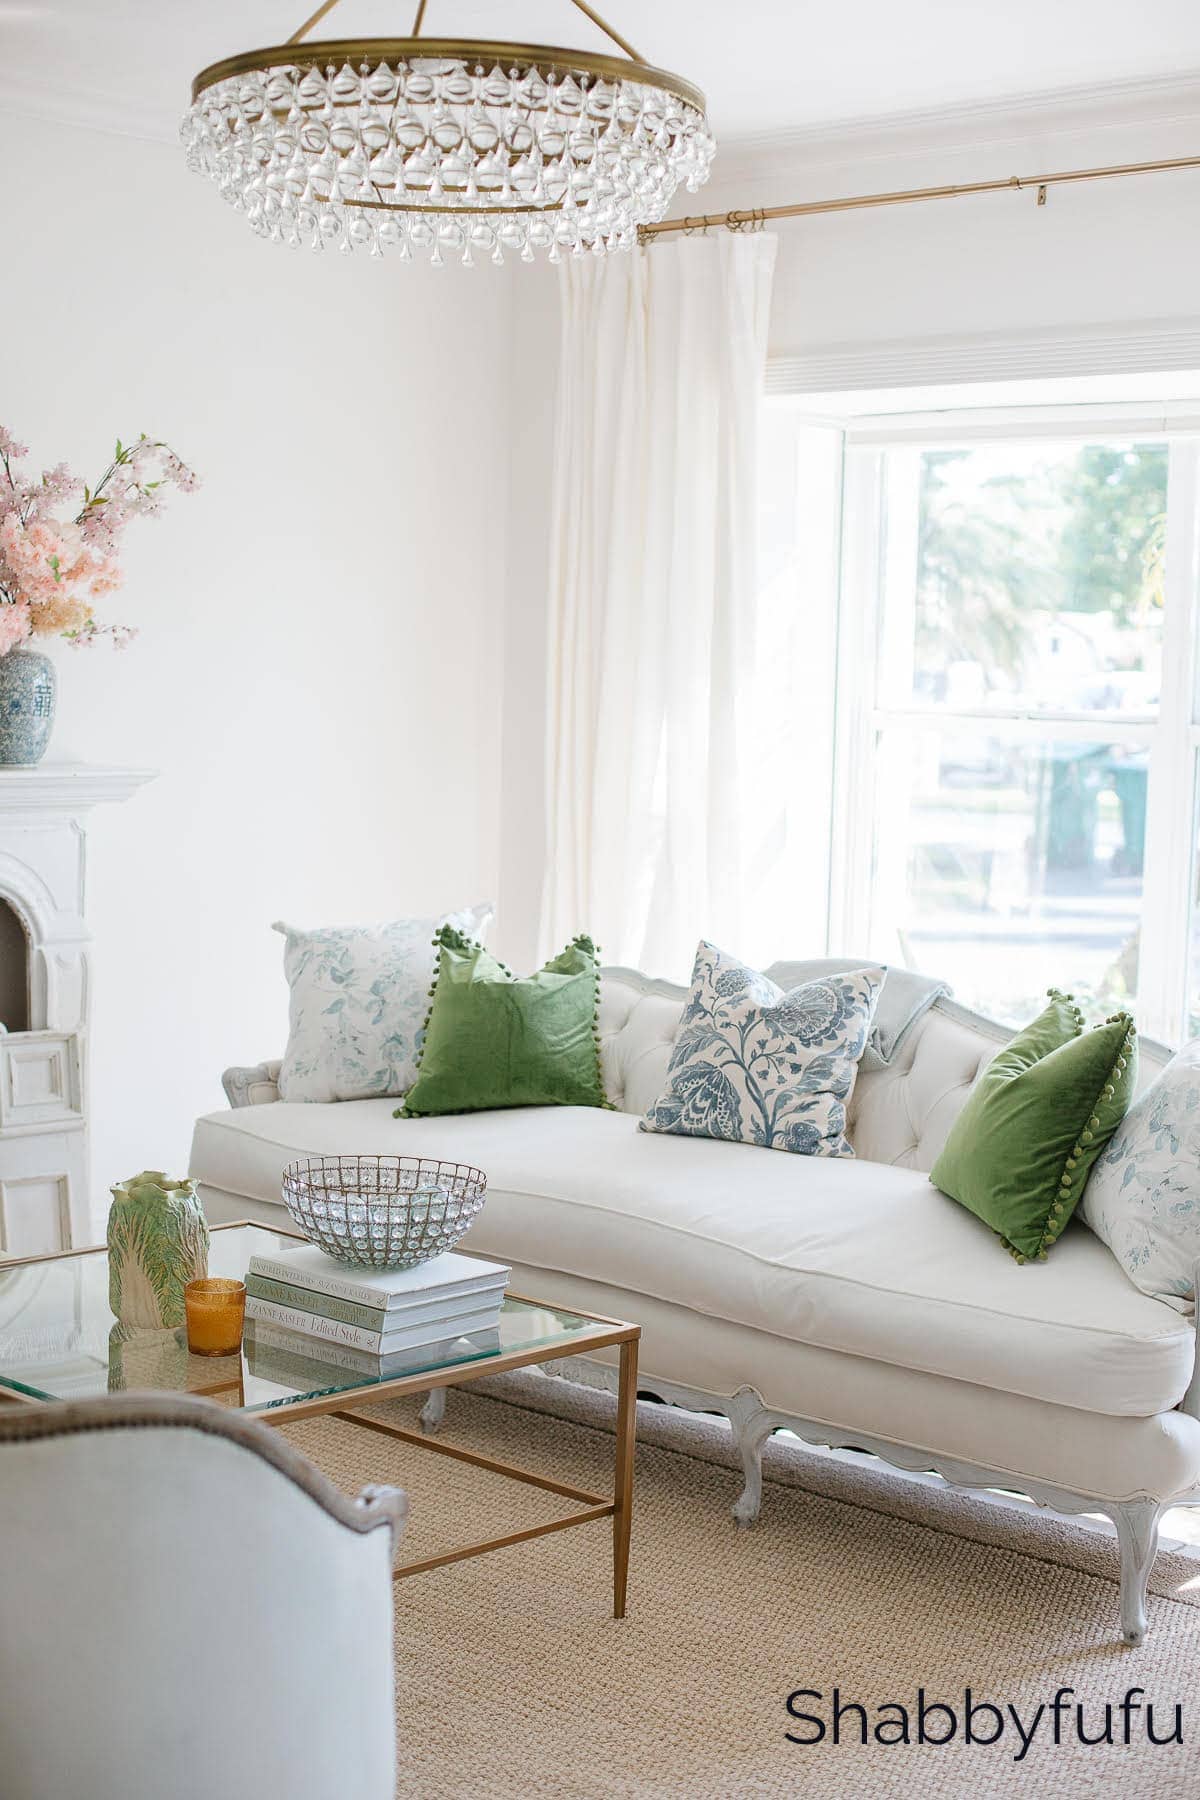 Redecorate Without Buying Anything & More! Home Style Saturdays 386